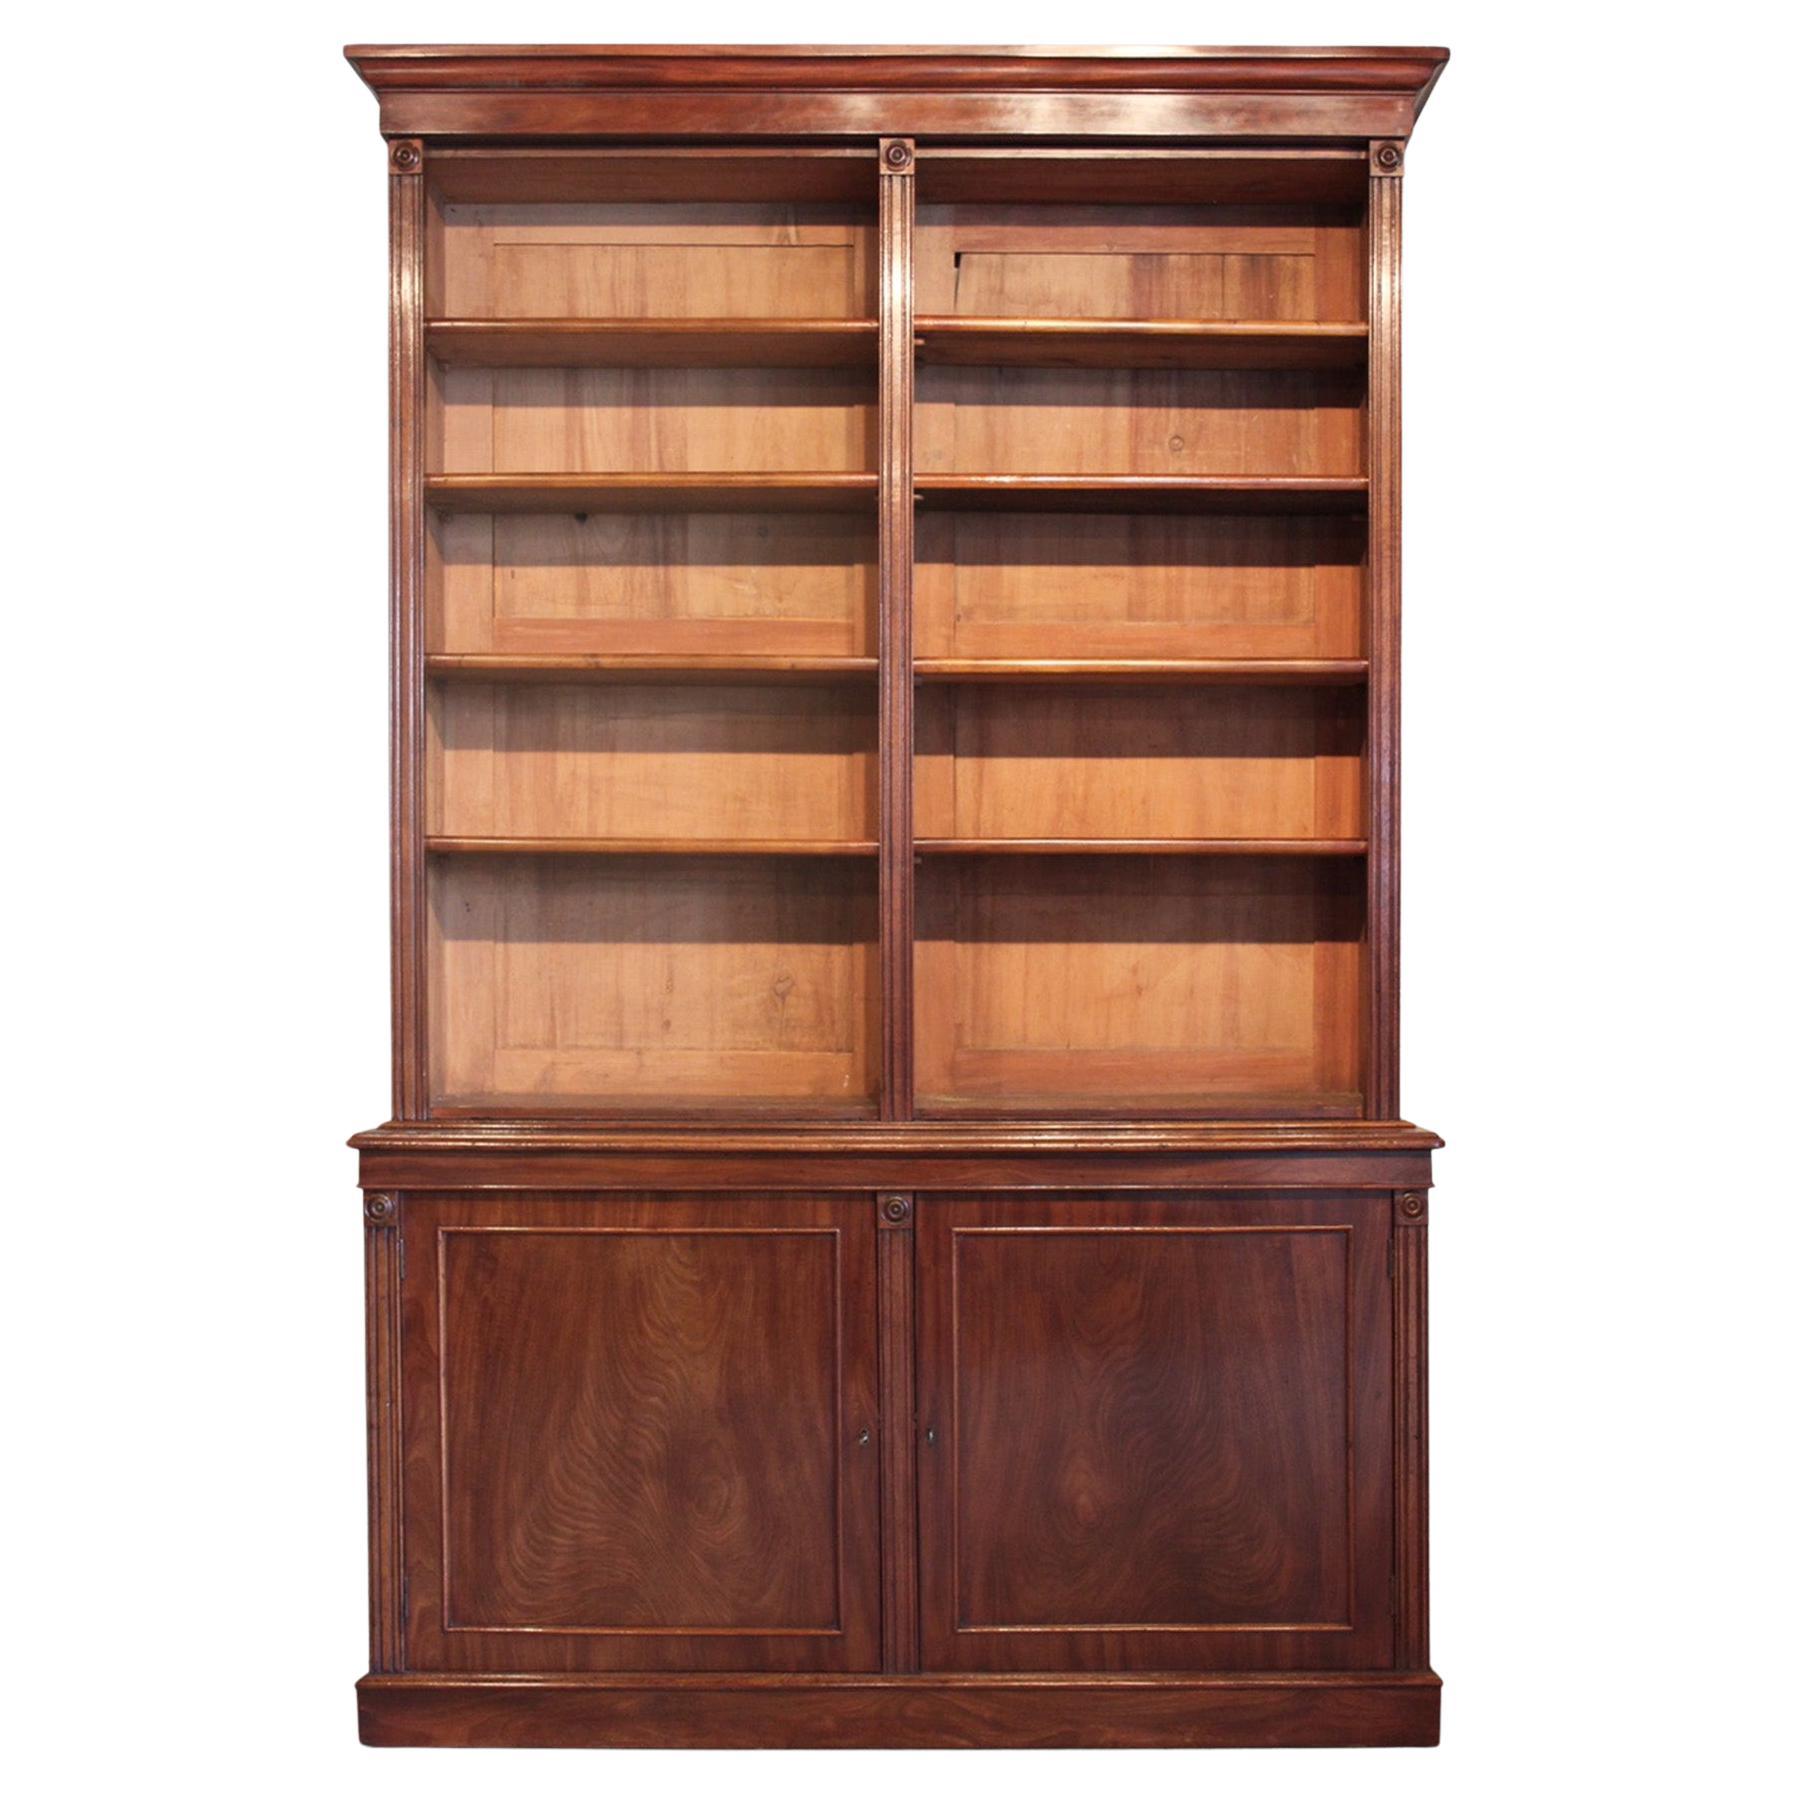 Very fine Early 19th Century William IV Period Open Mahogany Library Bookcase